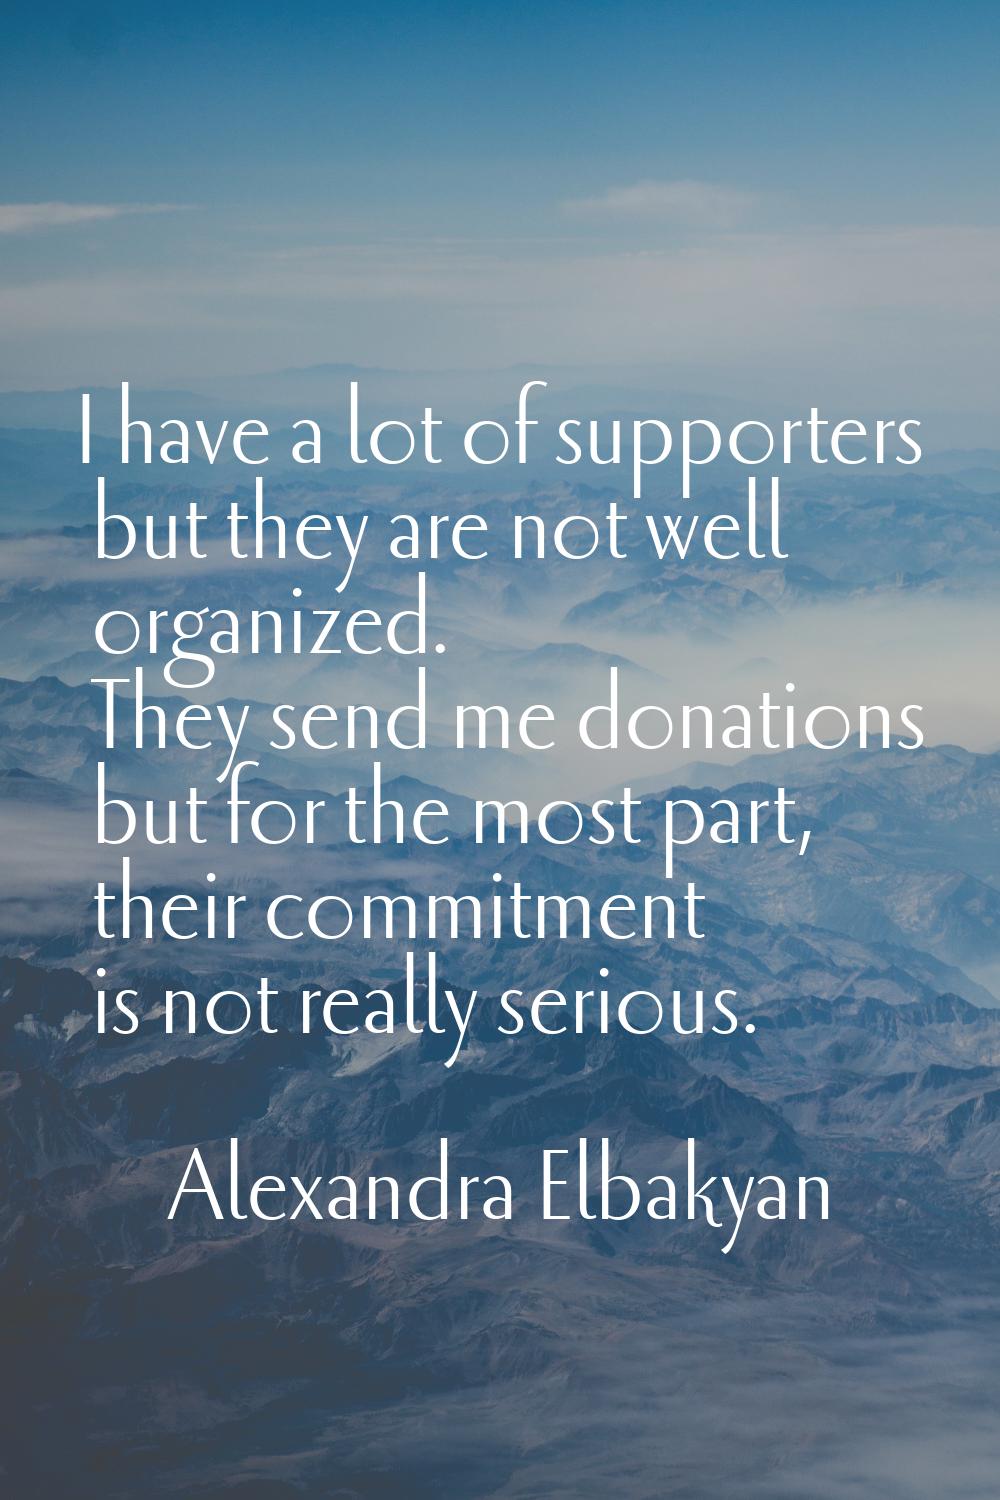 I have a lot of supporters but they are not well organized. They send me donations but for the most